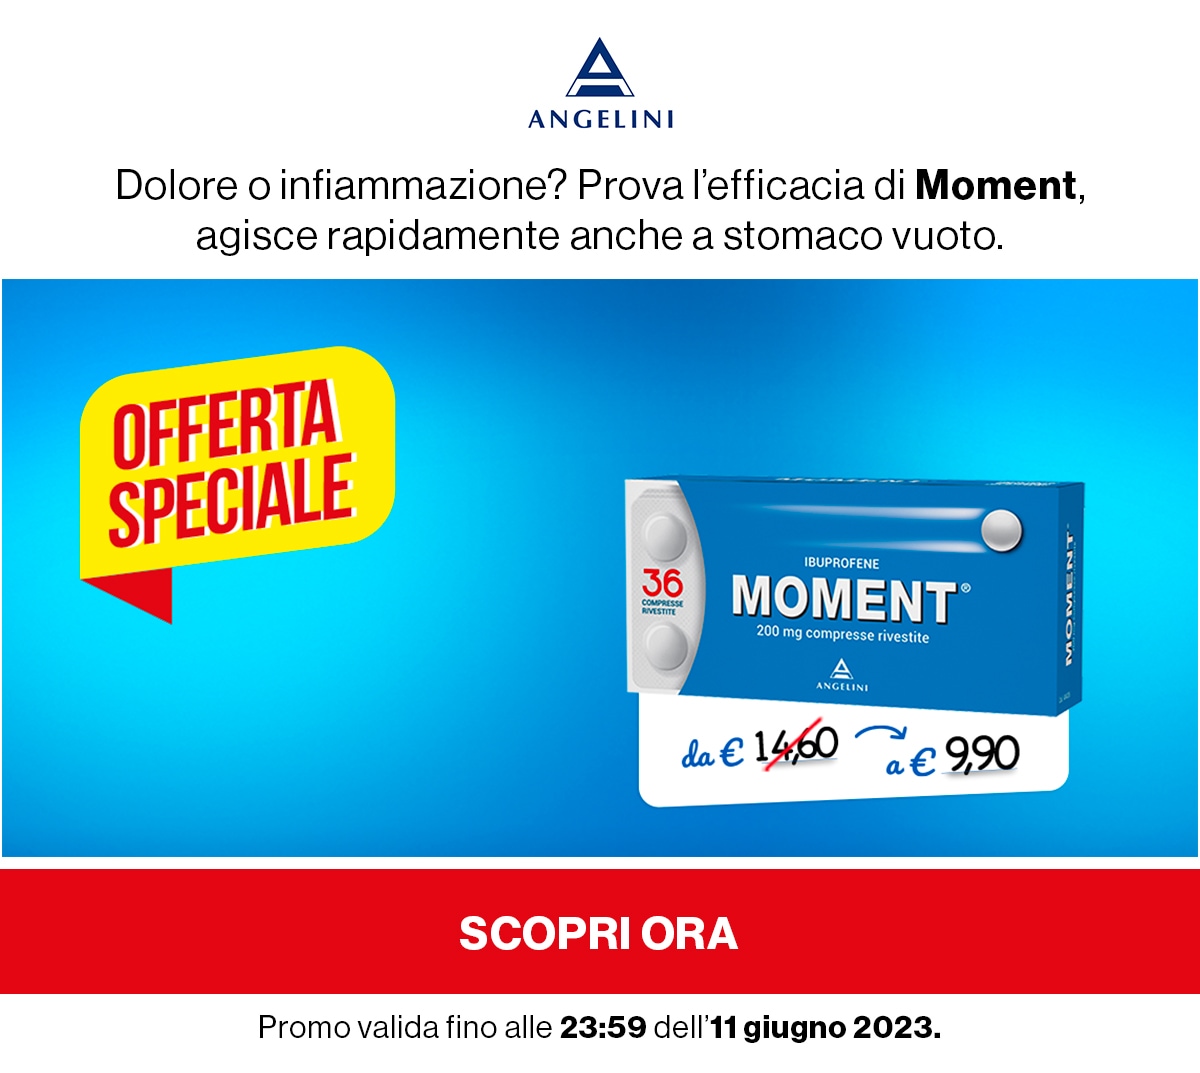 Moment offerta speciale a 9,90€